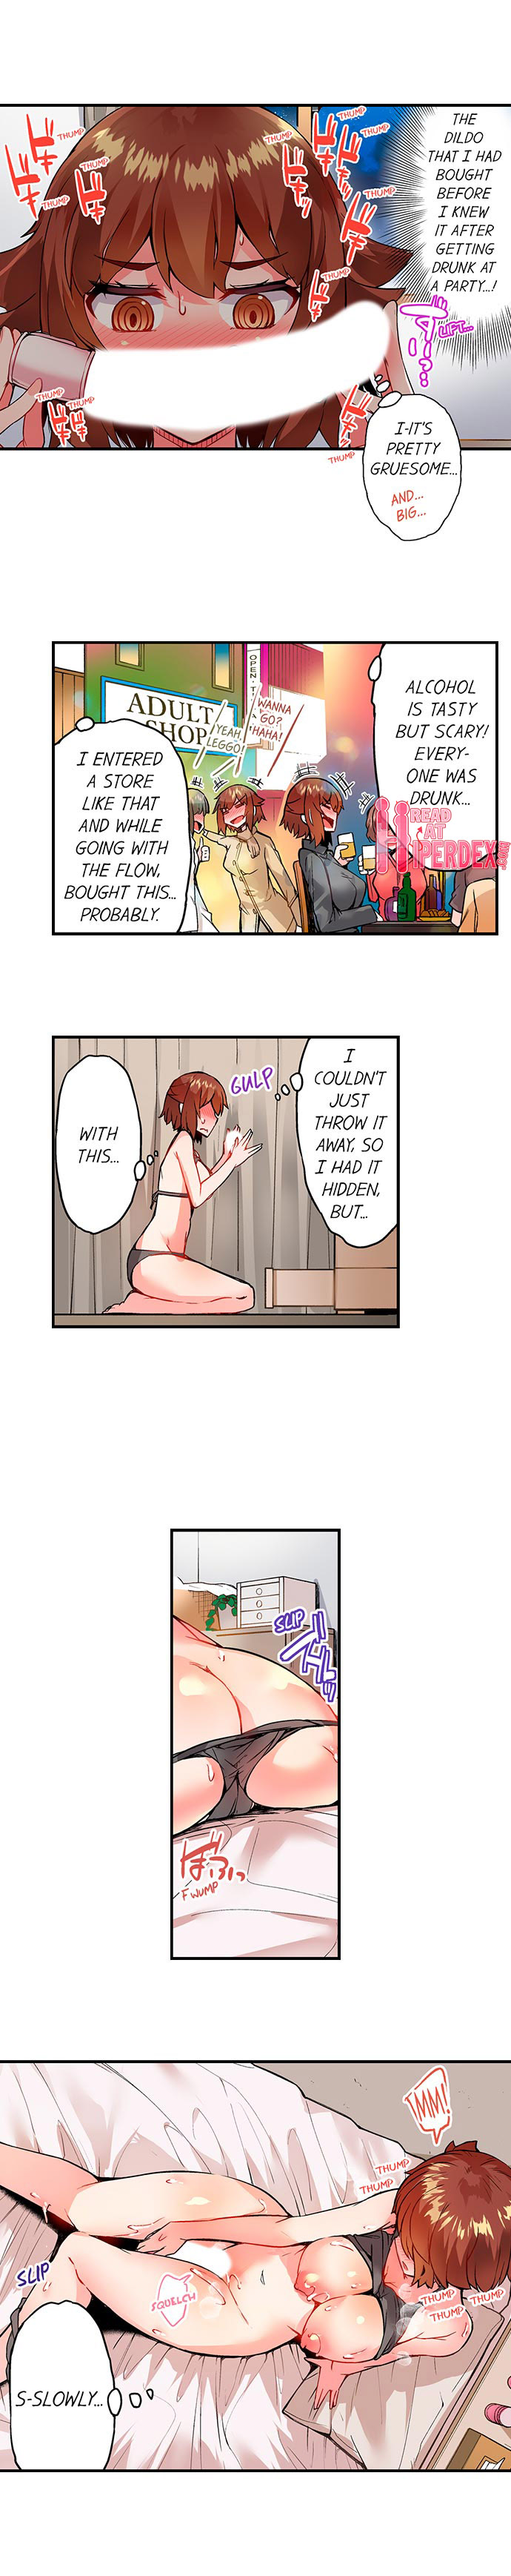 Traditional Job of Washing Girls’ Body - Chapter 122 Page 3